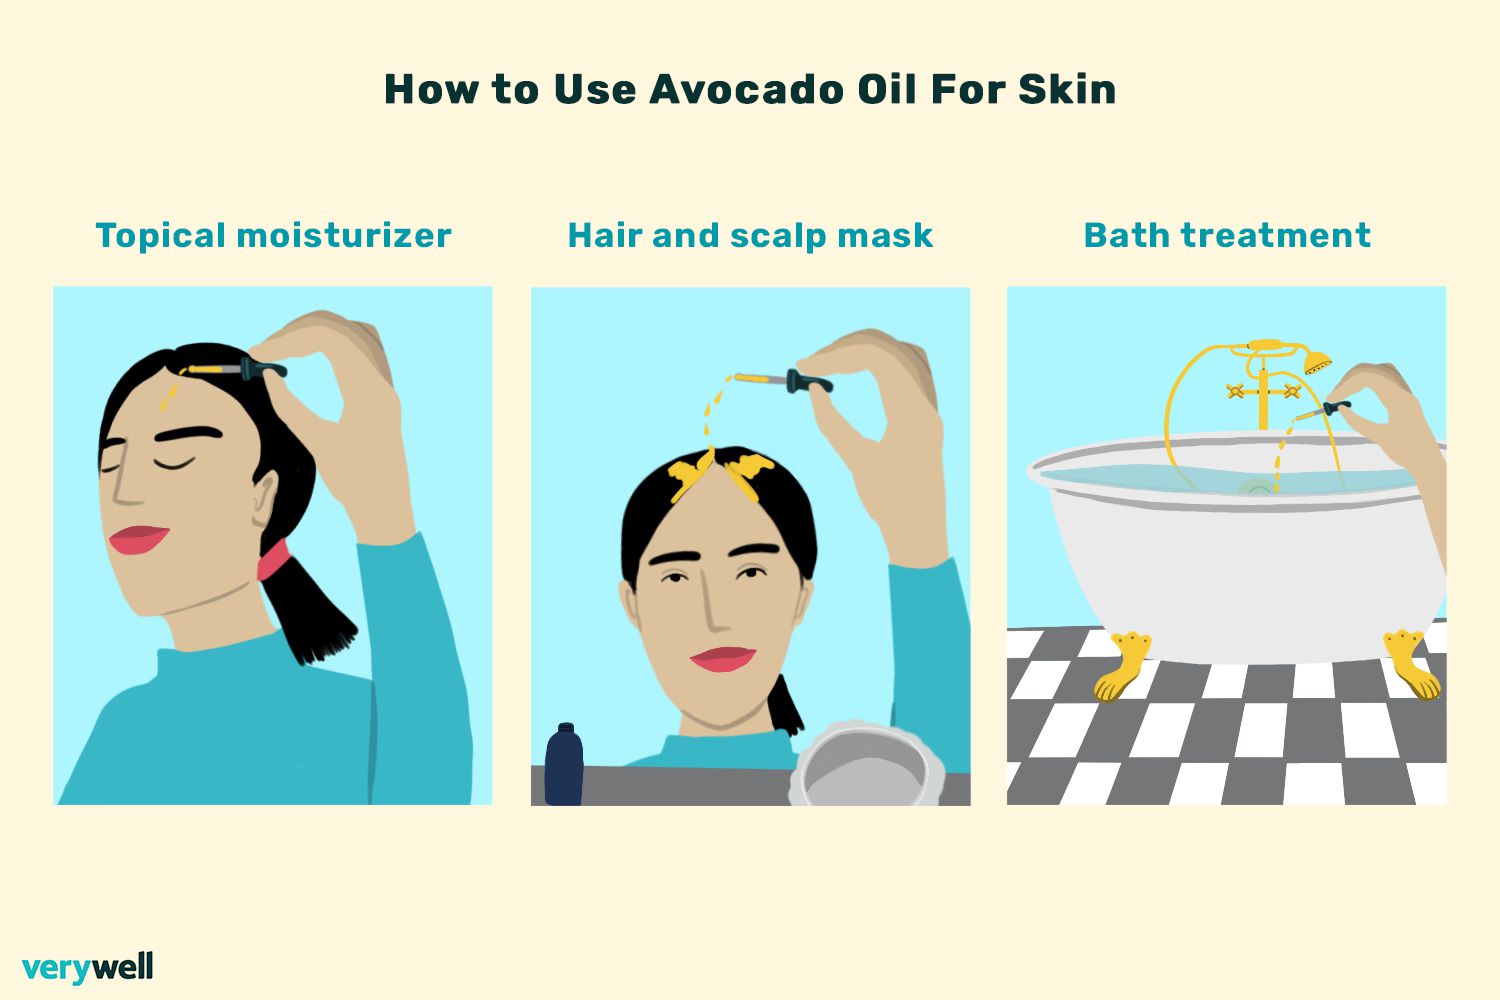 Best Way to Use Avocado Oil for Acne